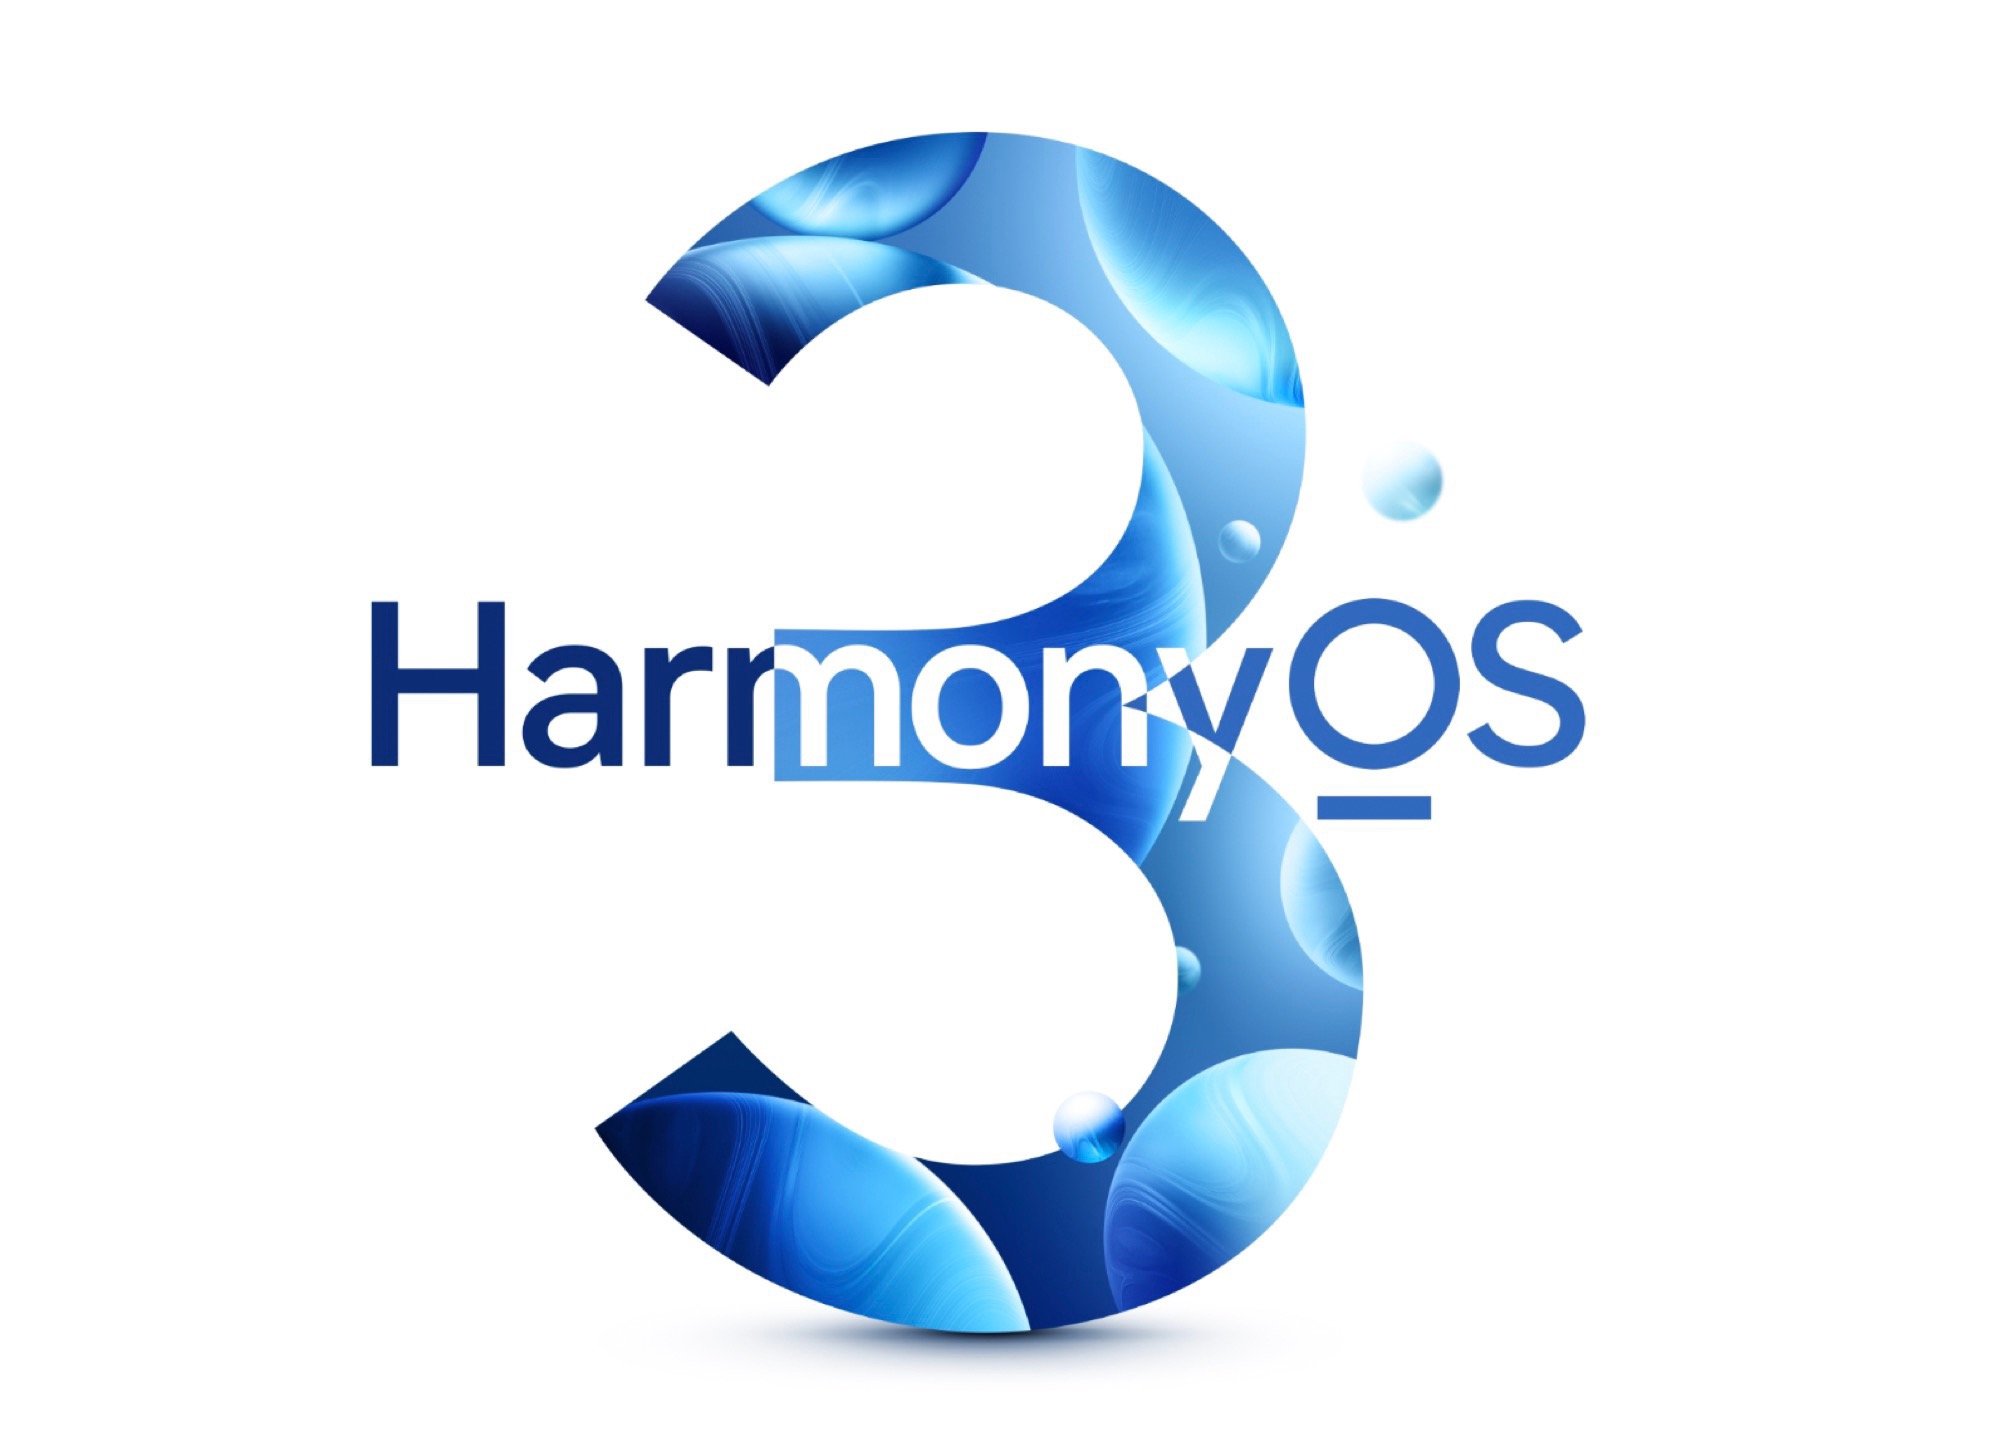 HarmonyOS 3: Huawei's Android alternative promises improved battery life, responsiveness and new features - NotebookCheck.net News